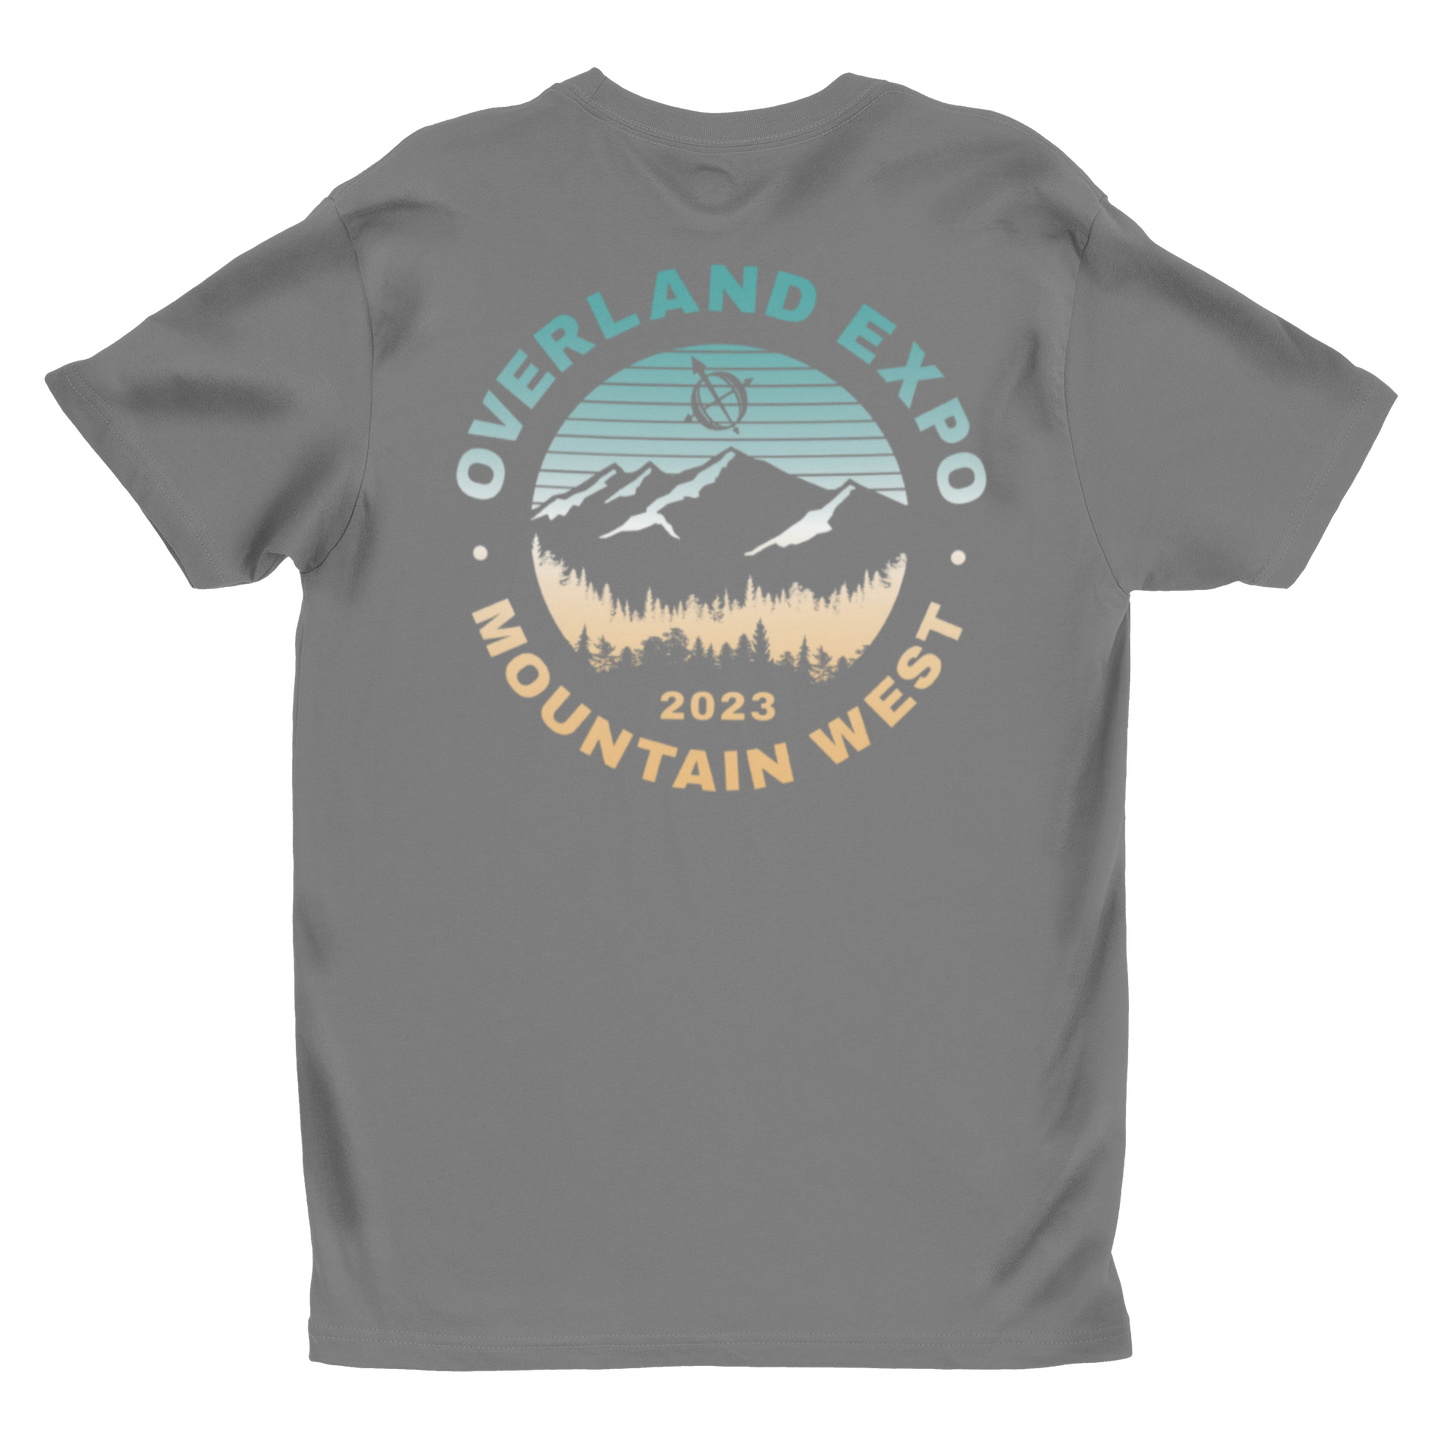 OE Mountain West 2023 - Limited Edition Tee - Charcoal Grey